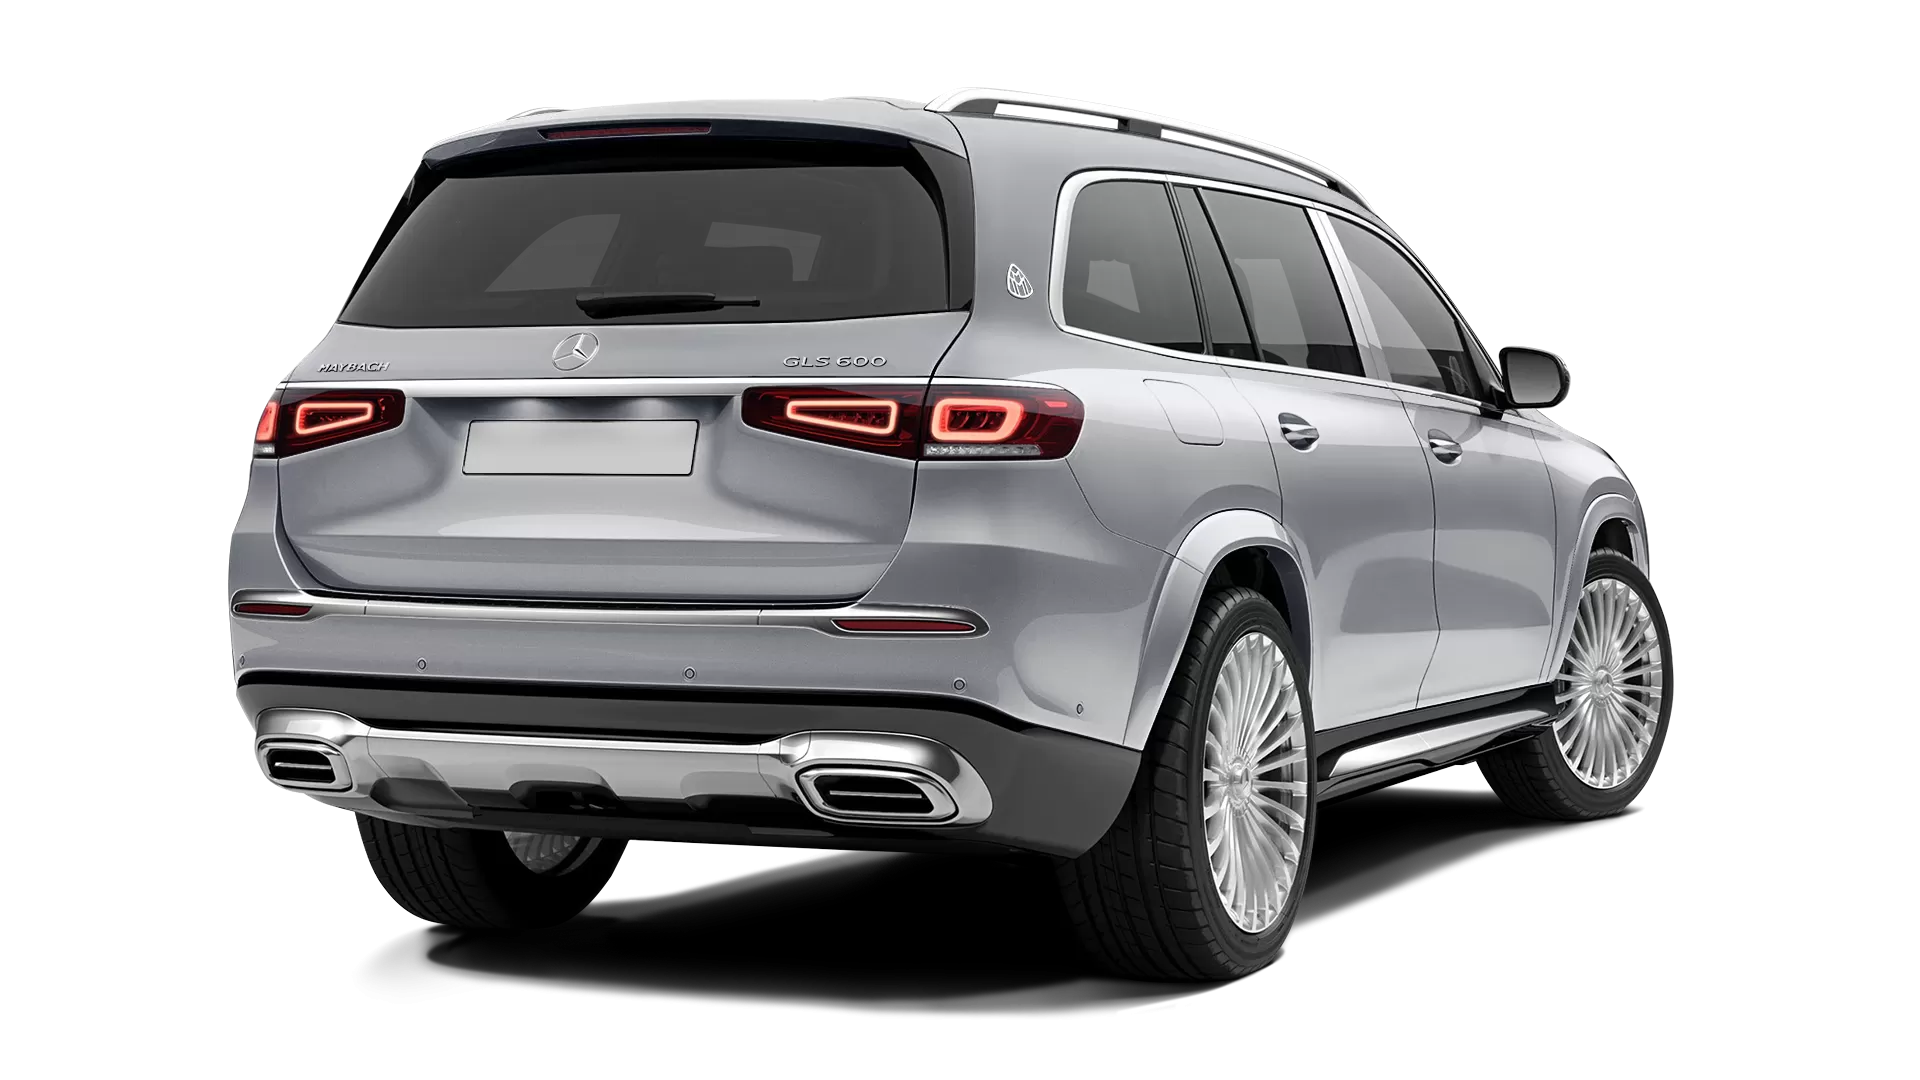 Mercedes Maybach GLS 600 stock rear view in High Tech Silver & Selenite Grey color